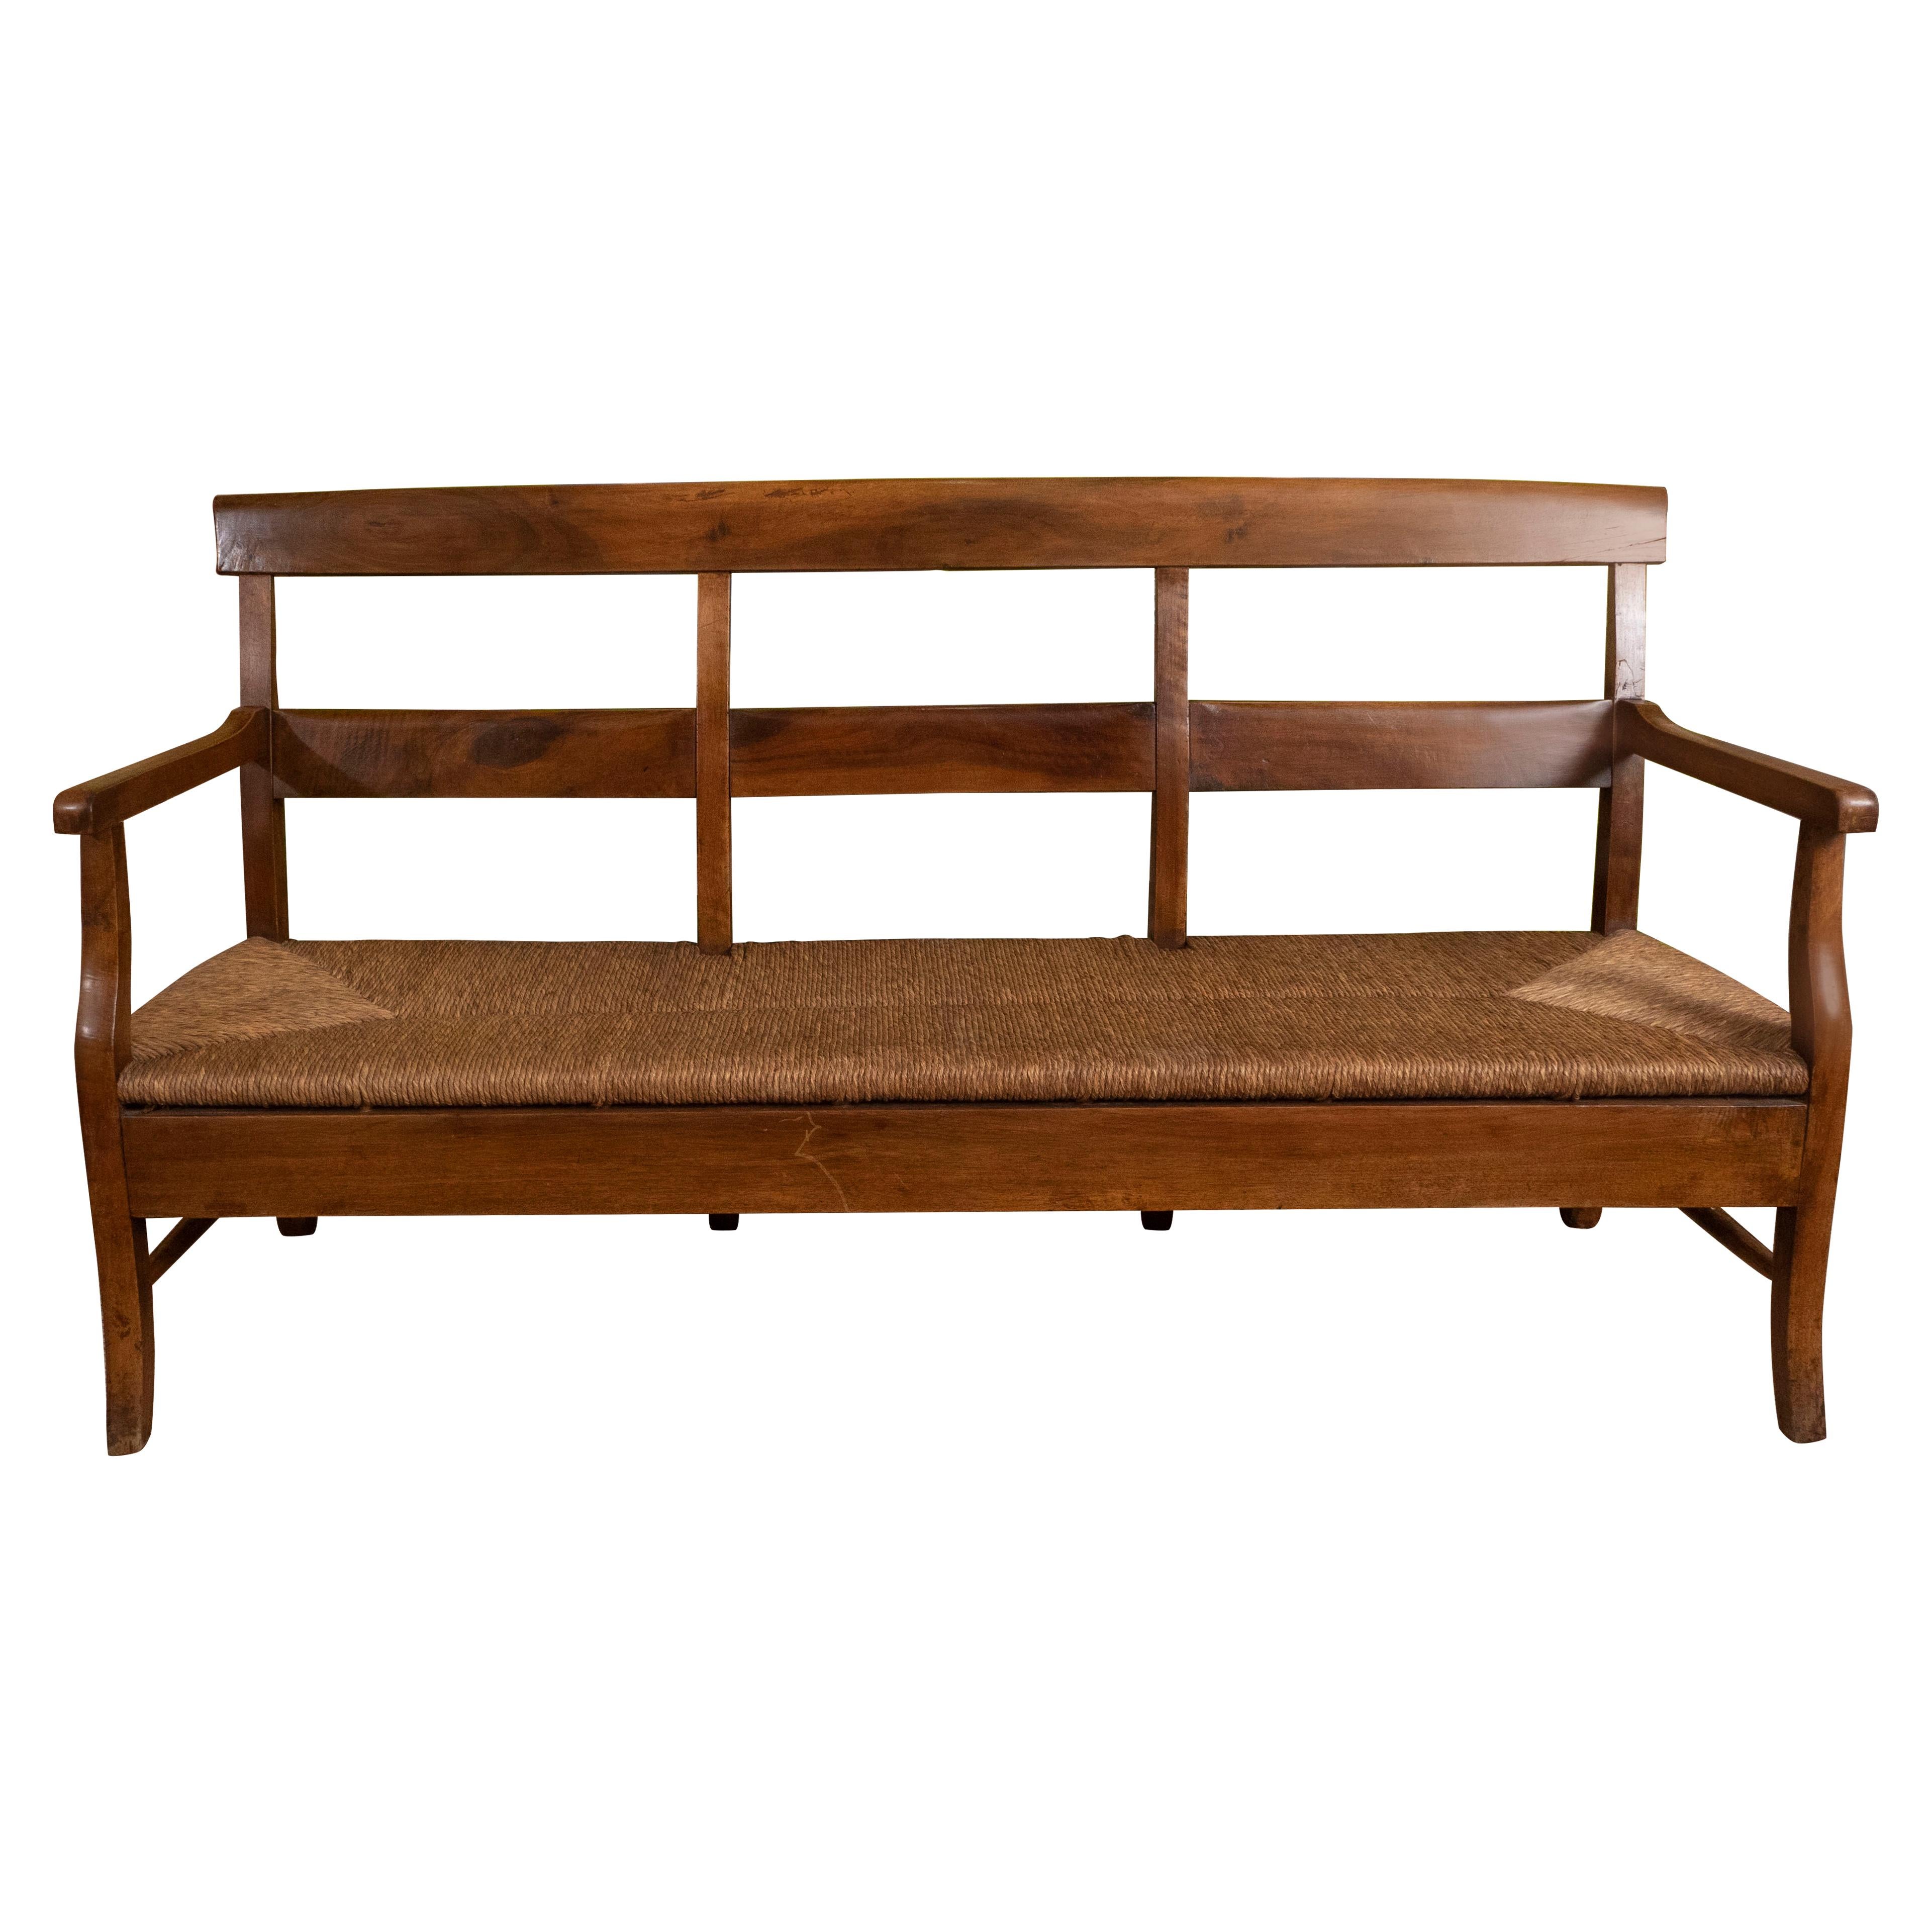 Provencal Bench with Woven Seat